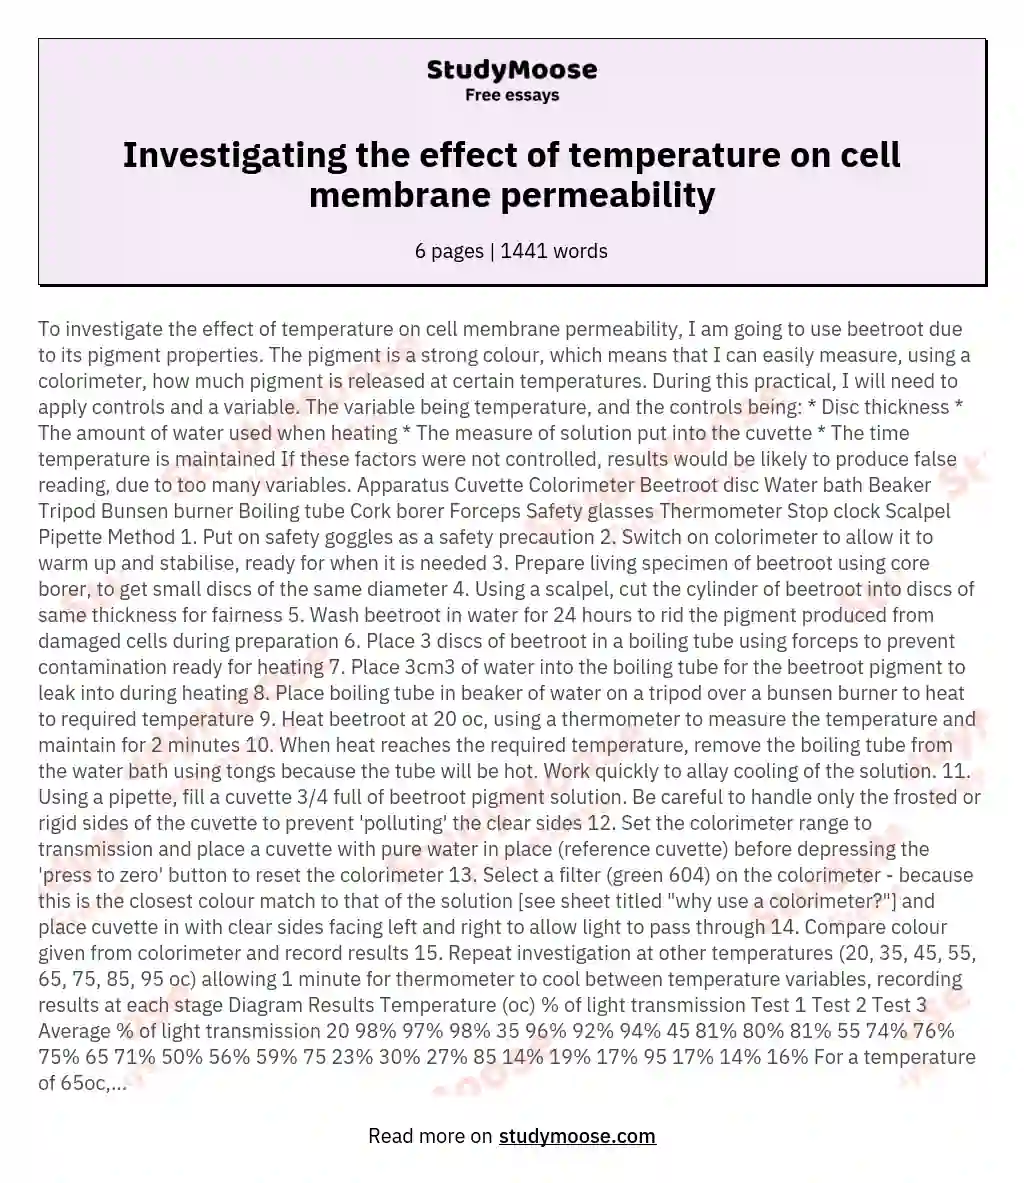 Investigating the effect of temperature on cell membrane permeability